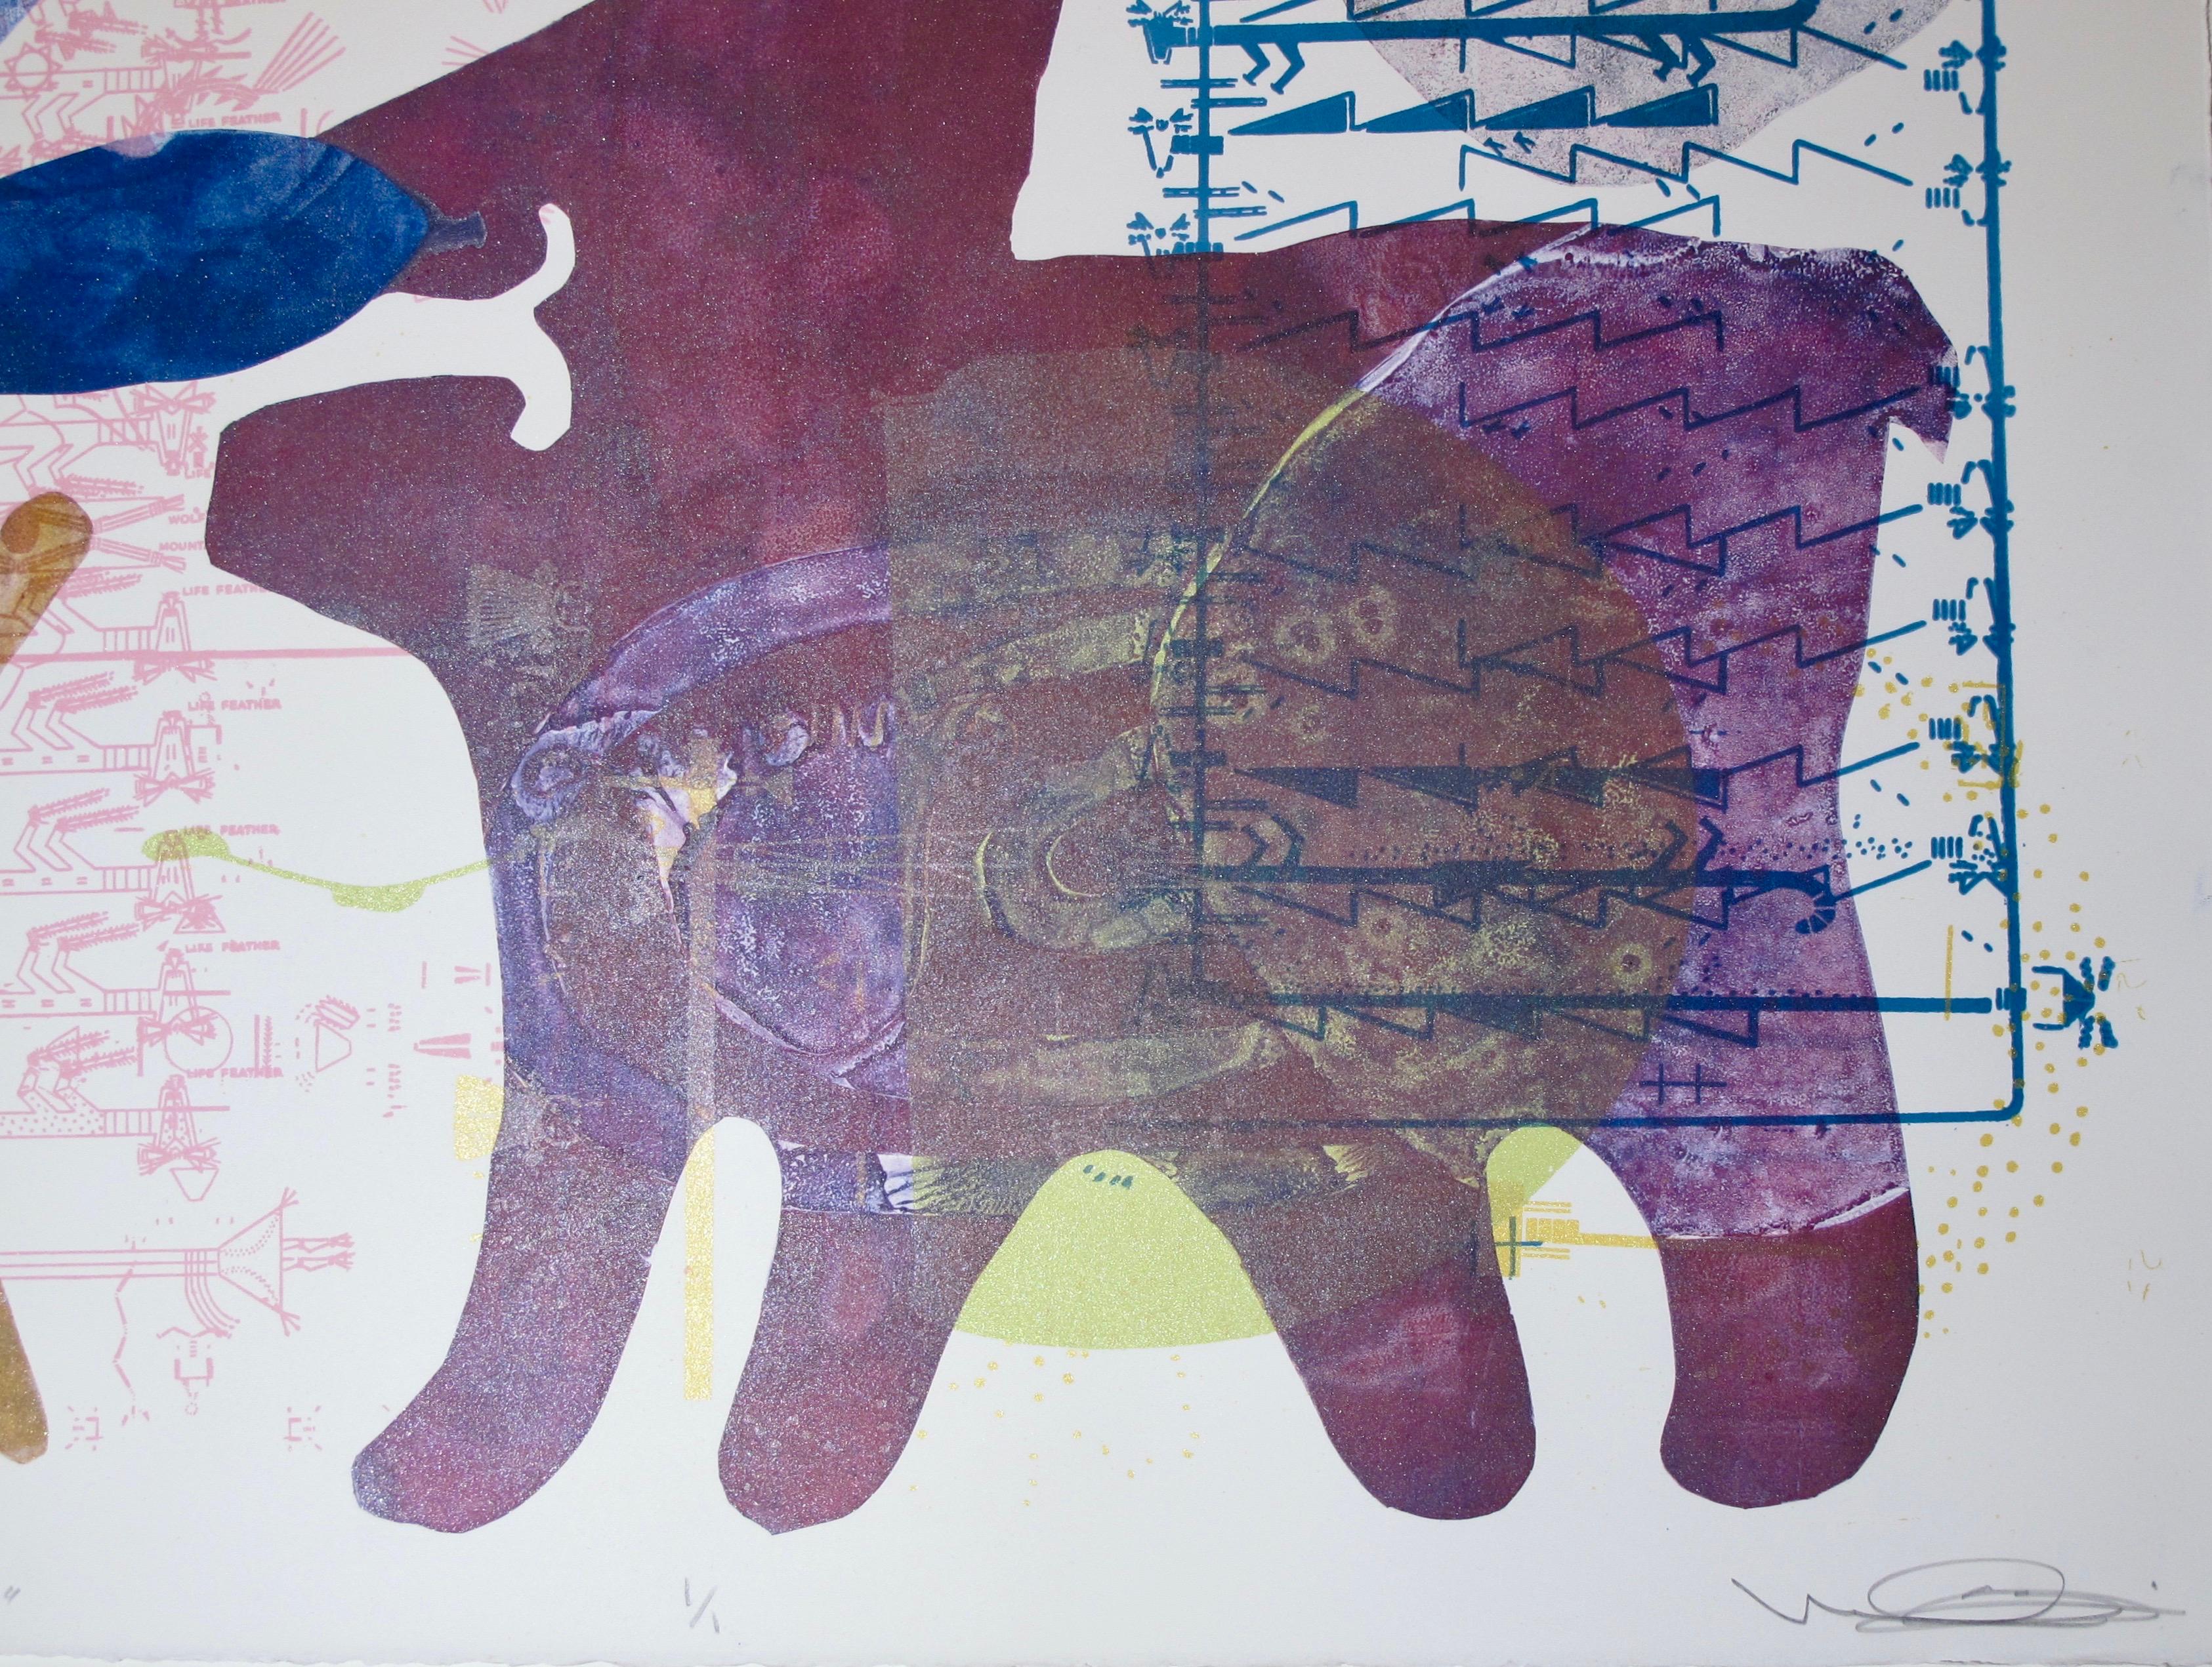 Special Little One-1966, Melanie Yazzie Navajo monotype painting paper bear blue

As a printmaker, painter, and sculptor, my work draws upon my rich Diné (Navajo) heritage. The work I make attempts to follows the Diné dictum “walk in beauty”